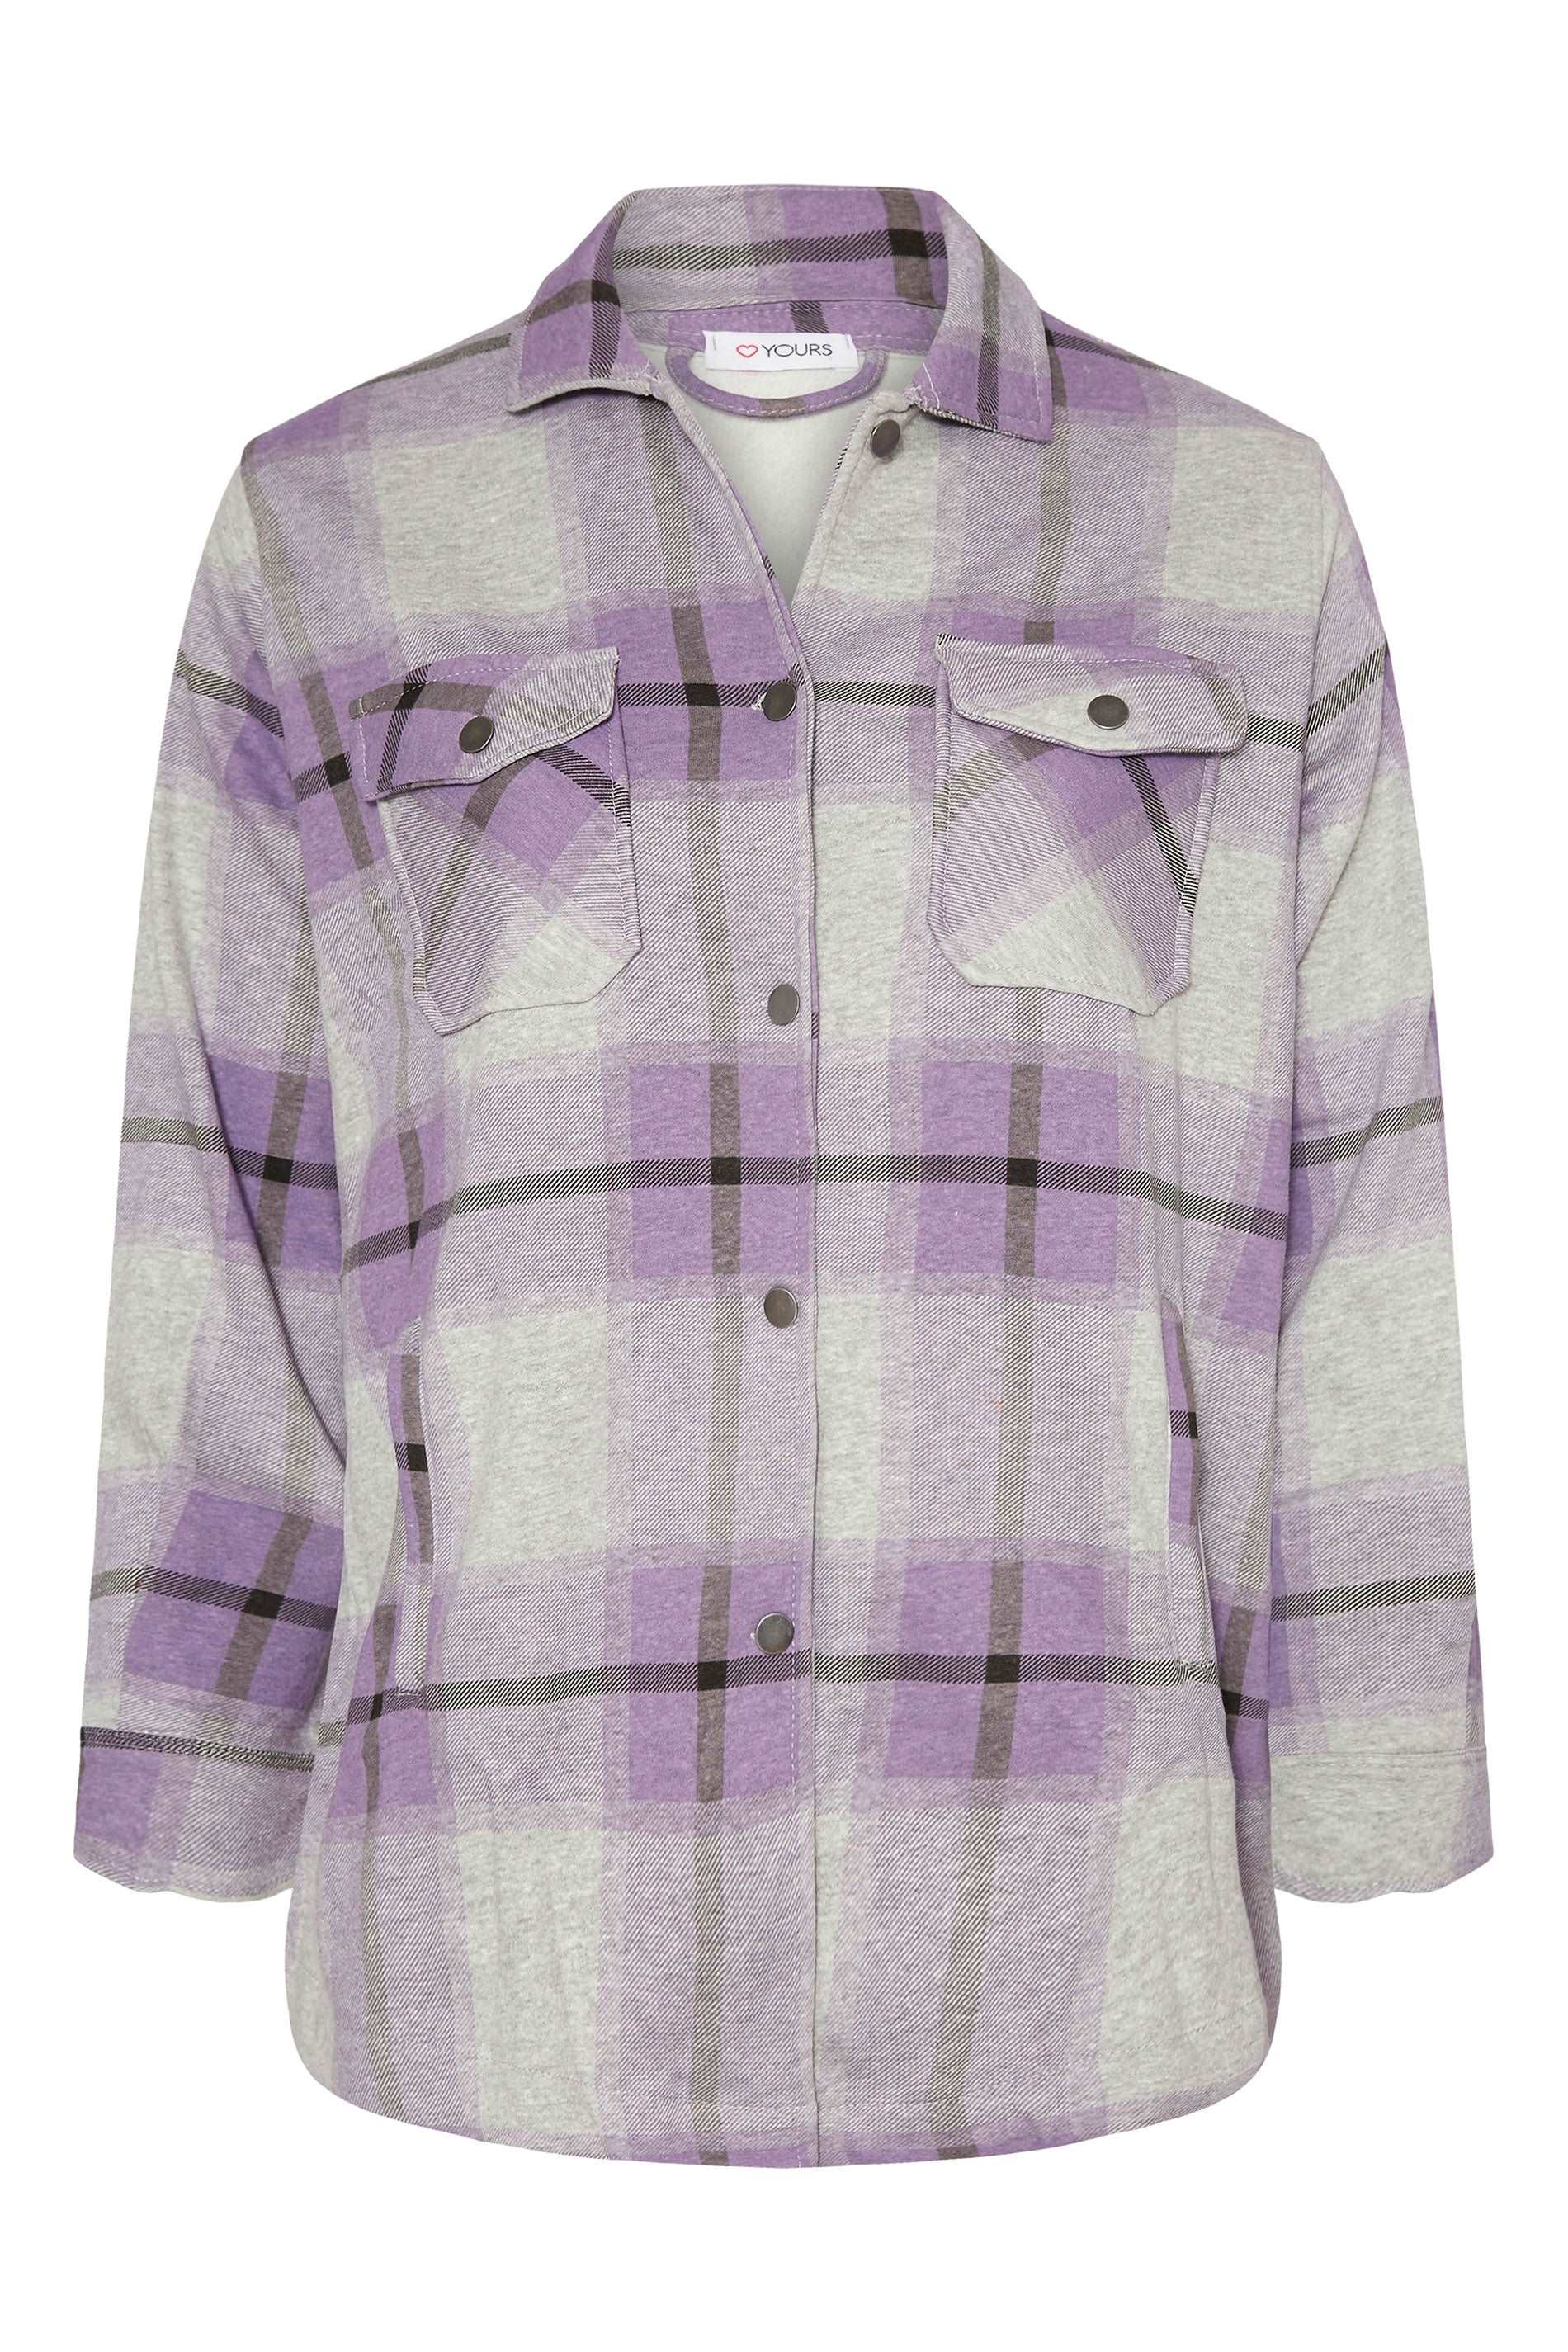 Grey Lilac Oversized check shacket For Her-2015 - FactoryX.pk